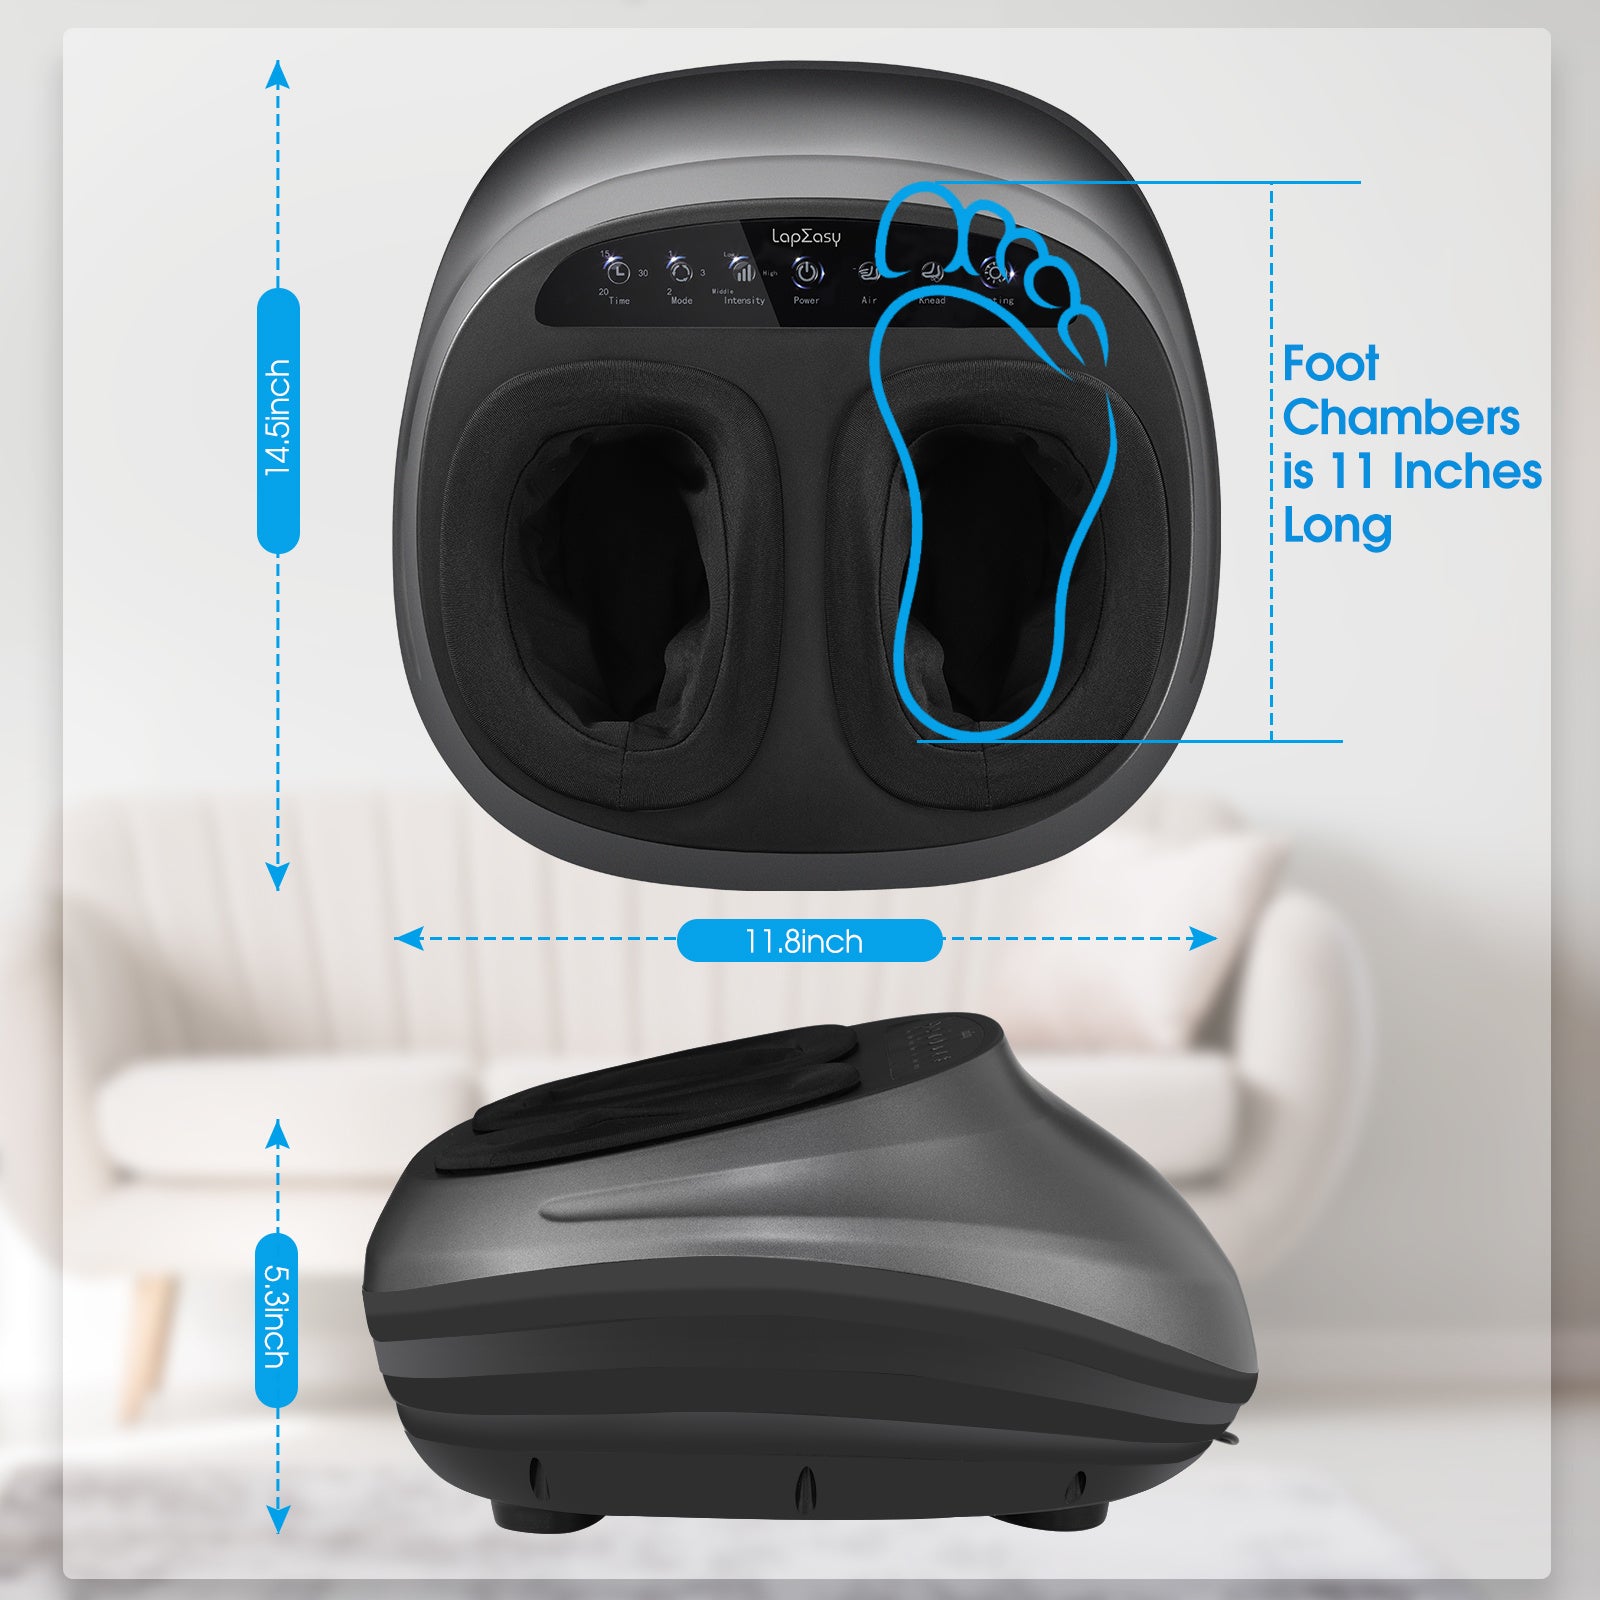 Image showing the dimensions of various sections in the Foot Massager Machine with Heat